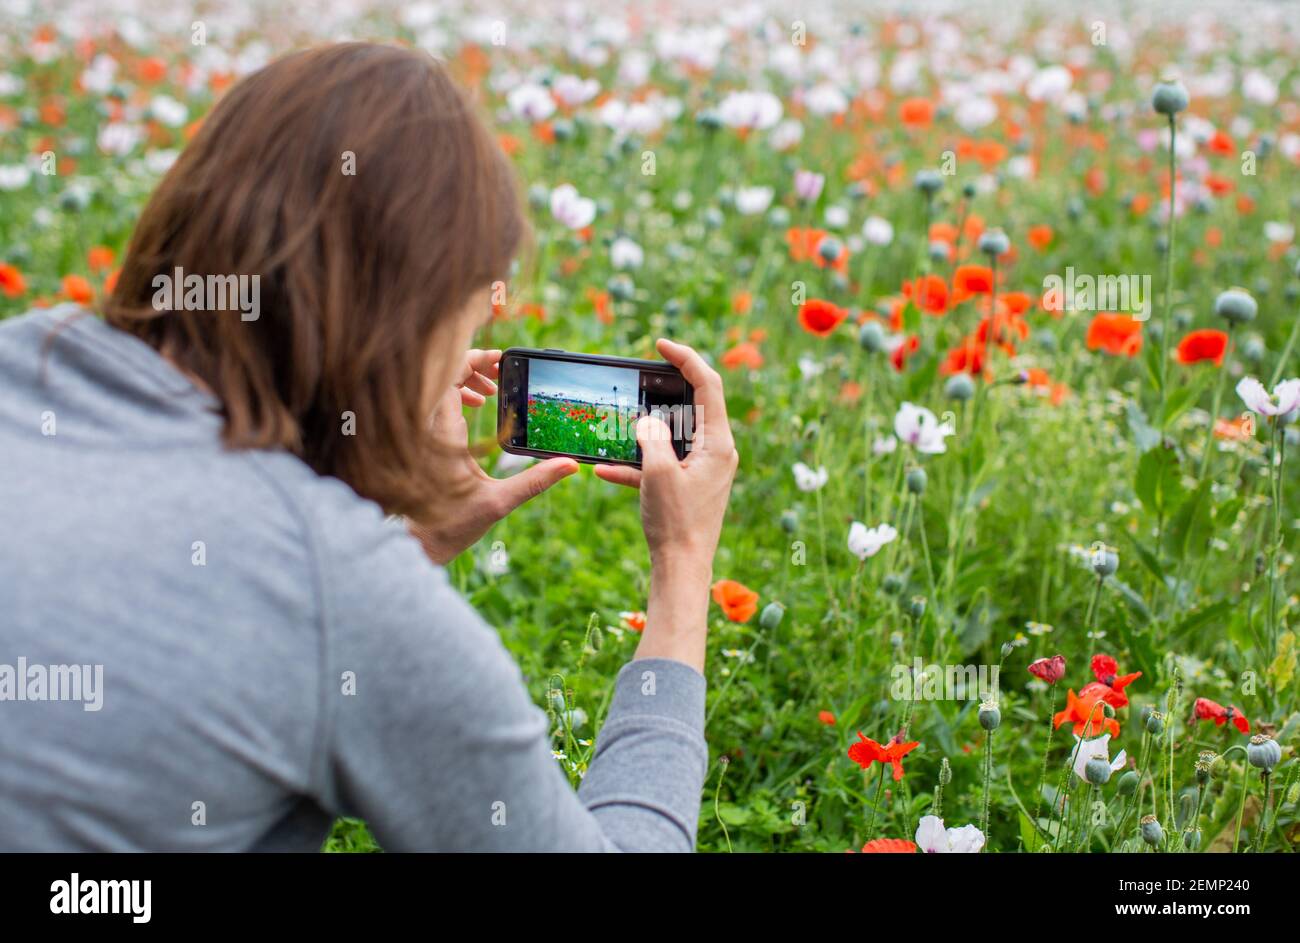 Woman using mobile phone to take photos of poppies in a field Stock Photo